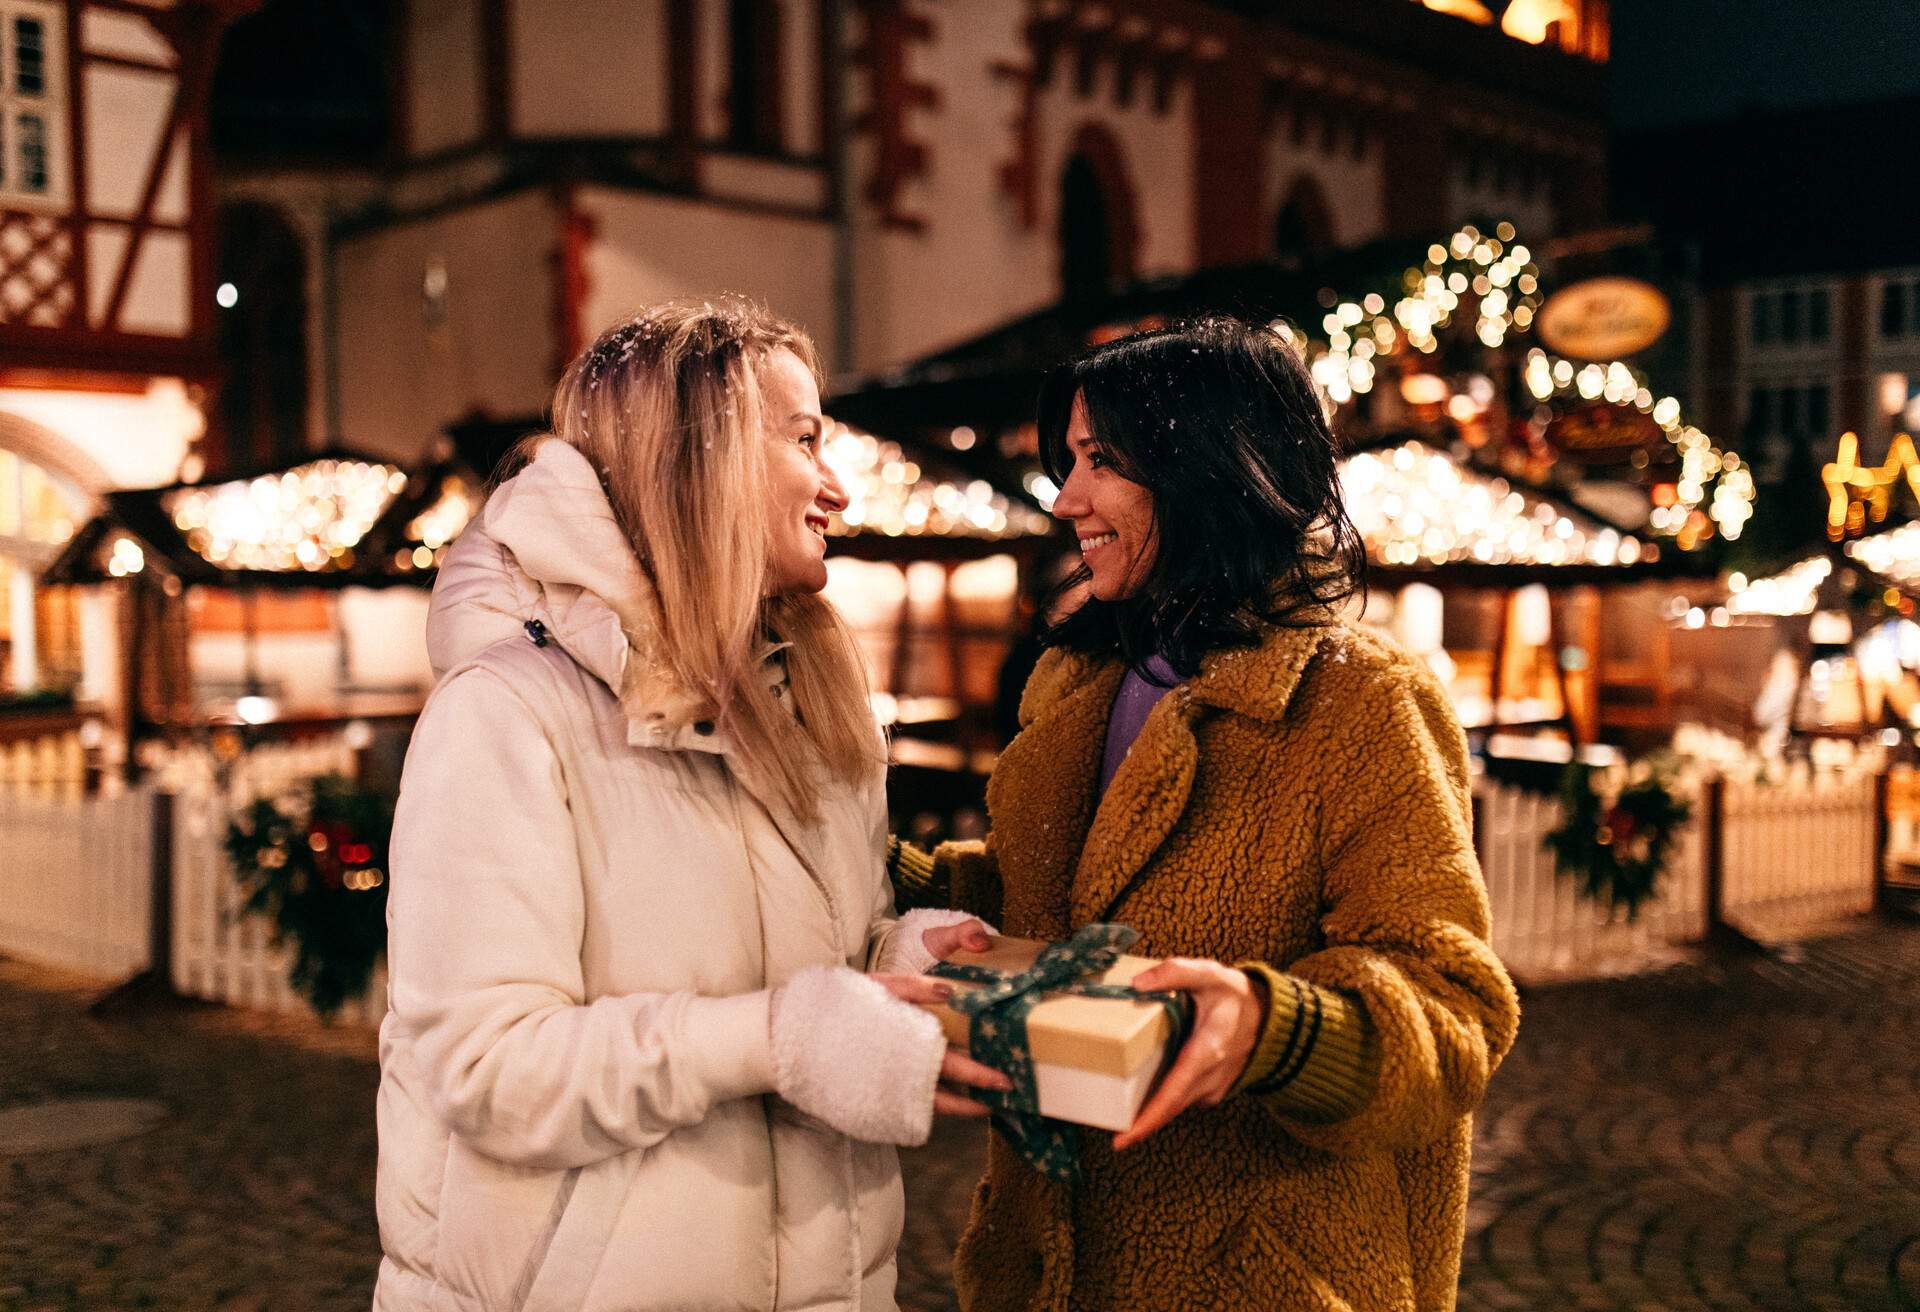 Two women in winter jackets smile while holding a wrapped gift.